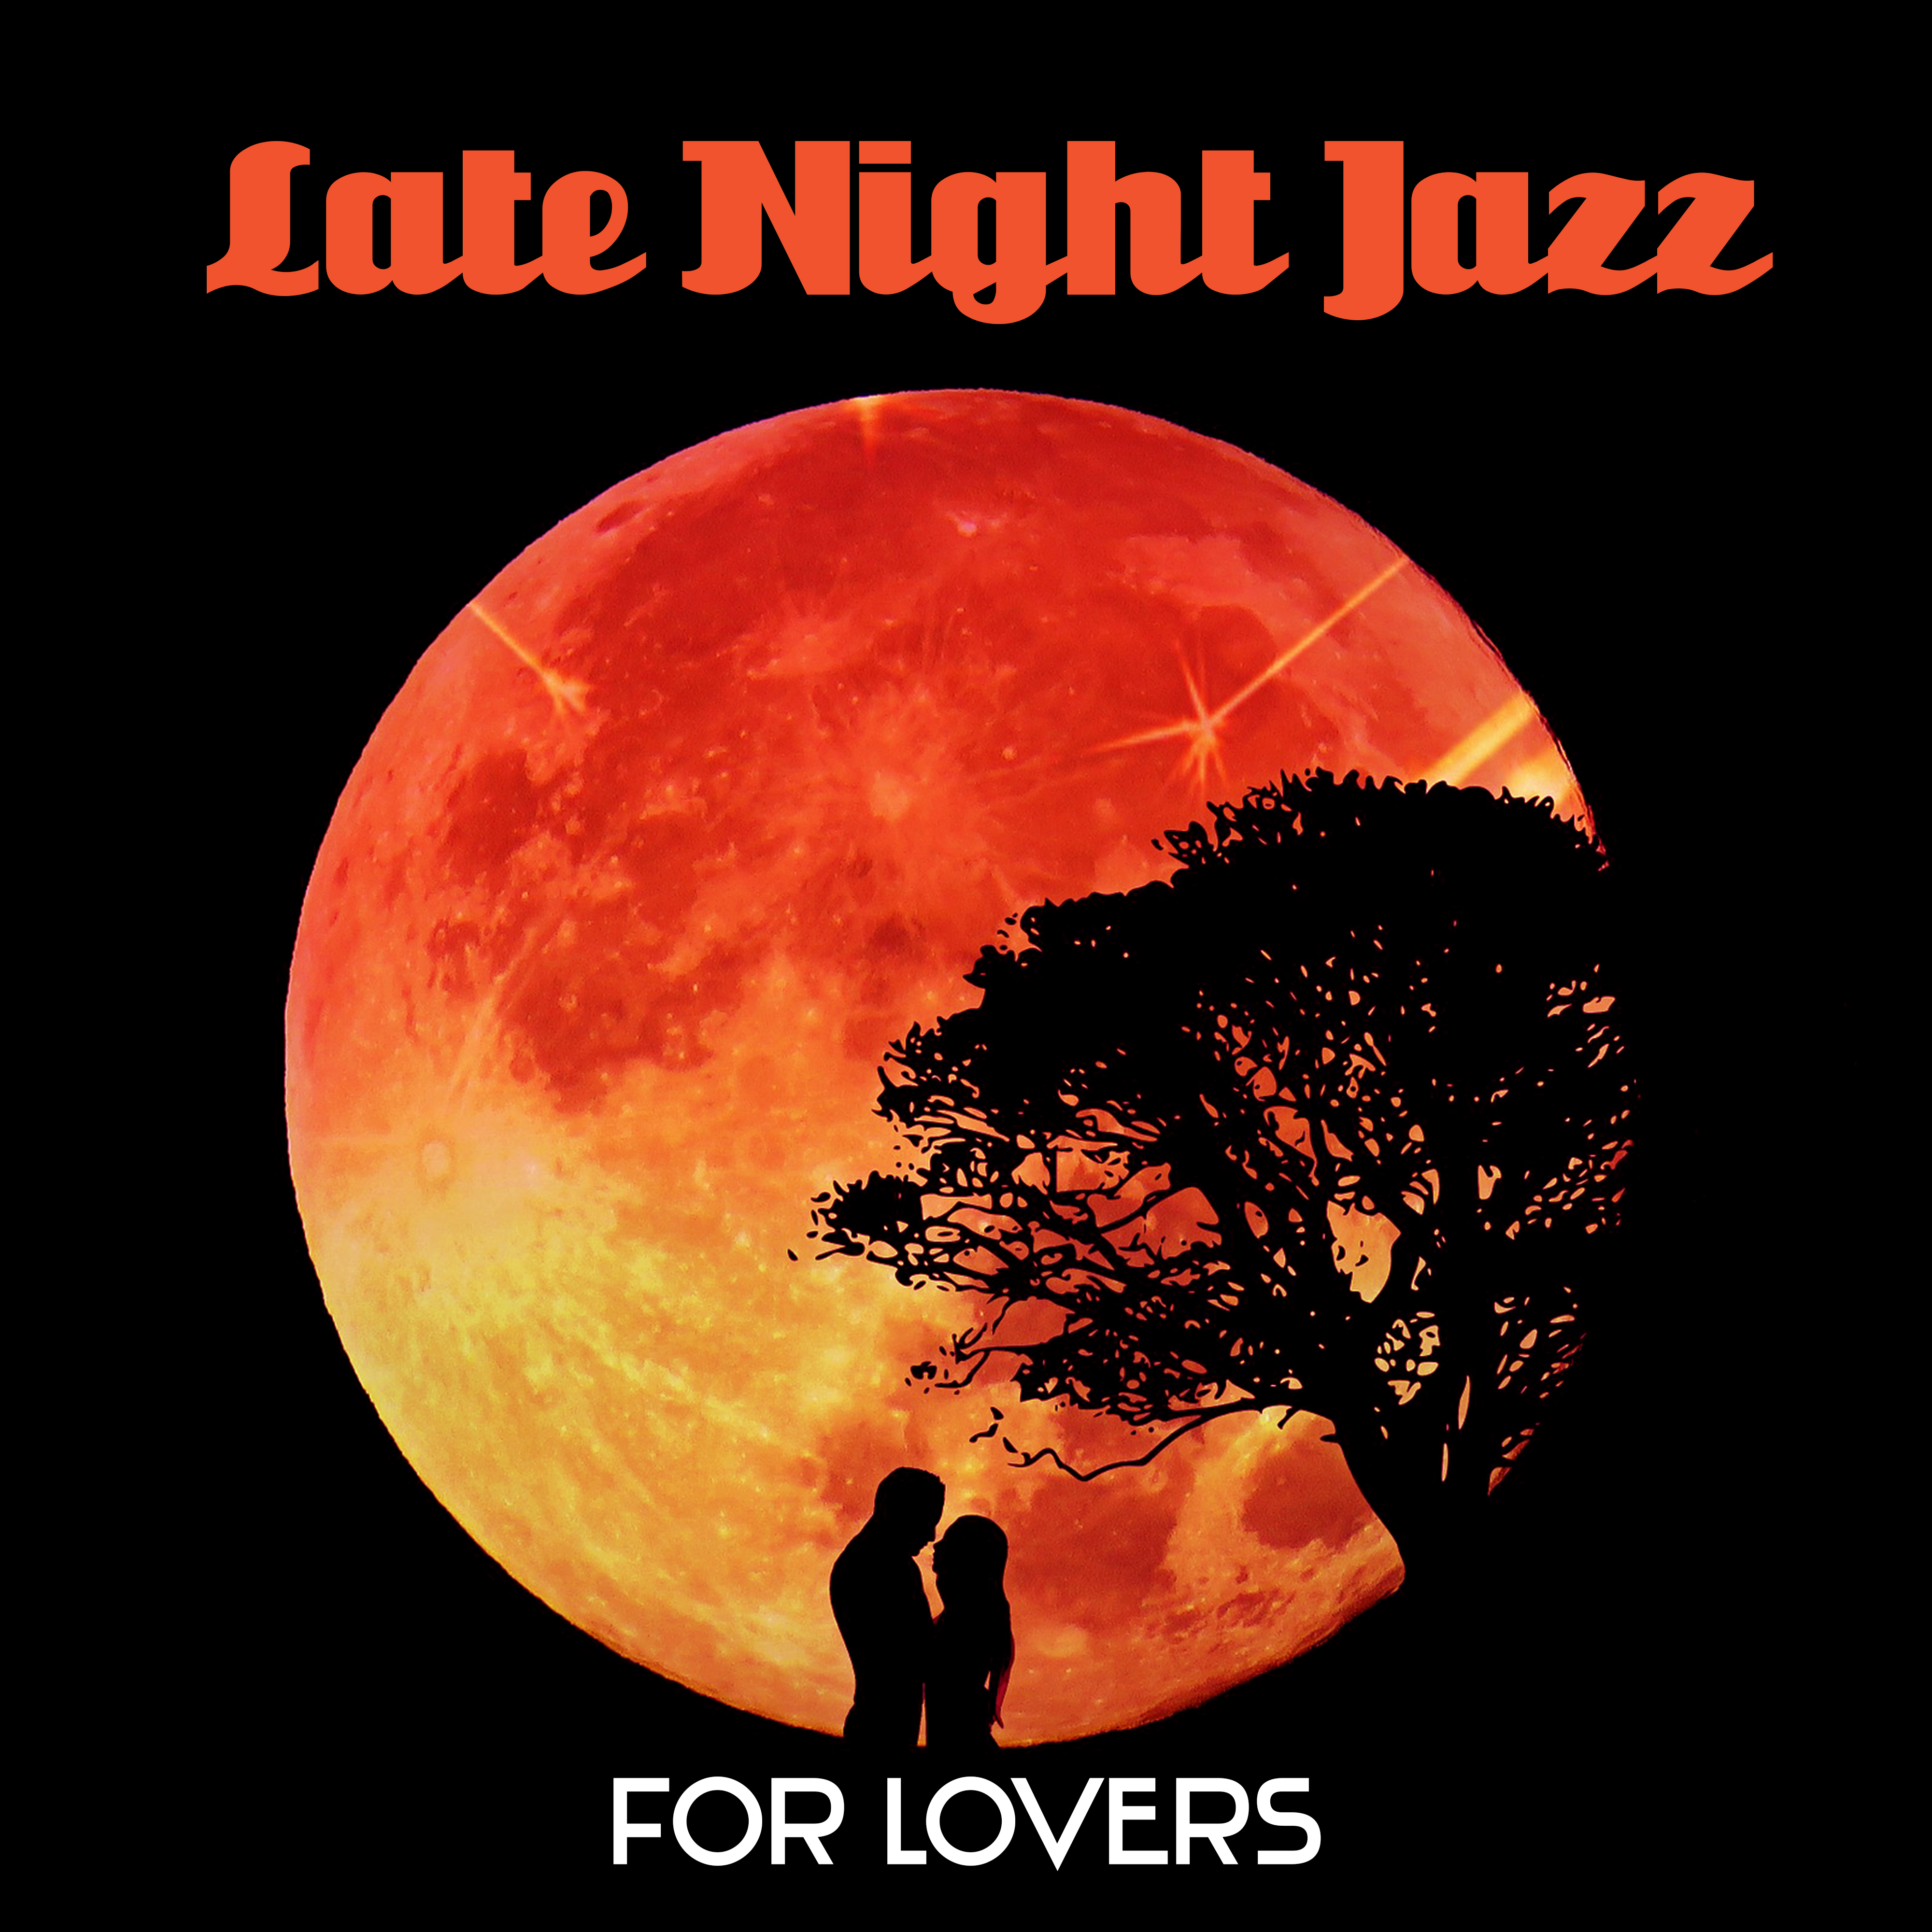 Late Night Jazz for Lovers  Easy Listening, Romantic Evening, Smooth Jazz, Rest Music